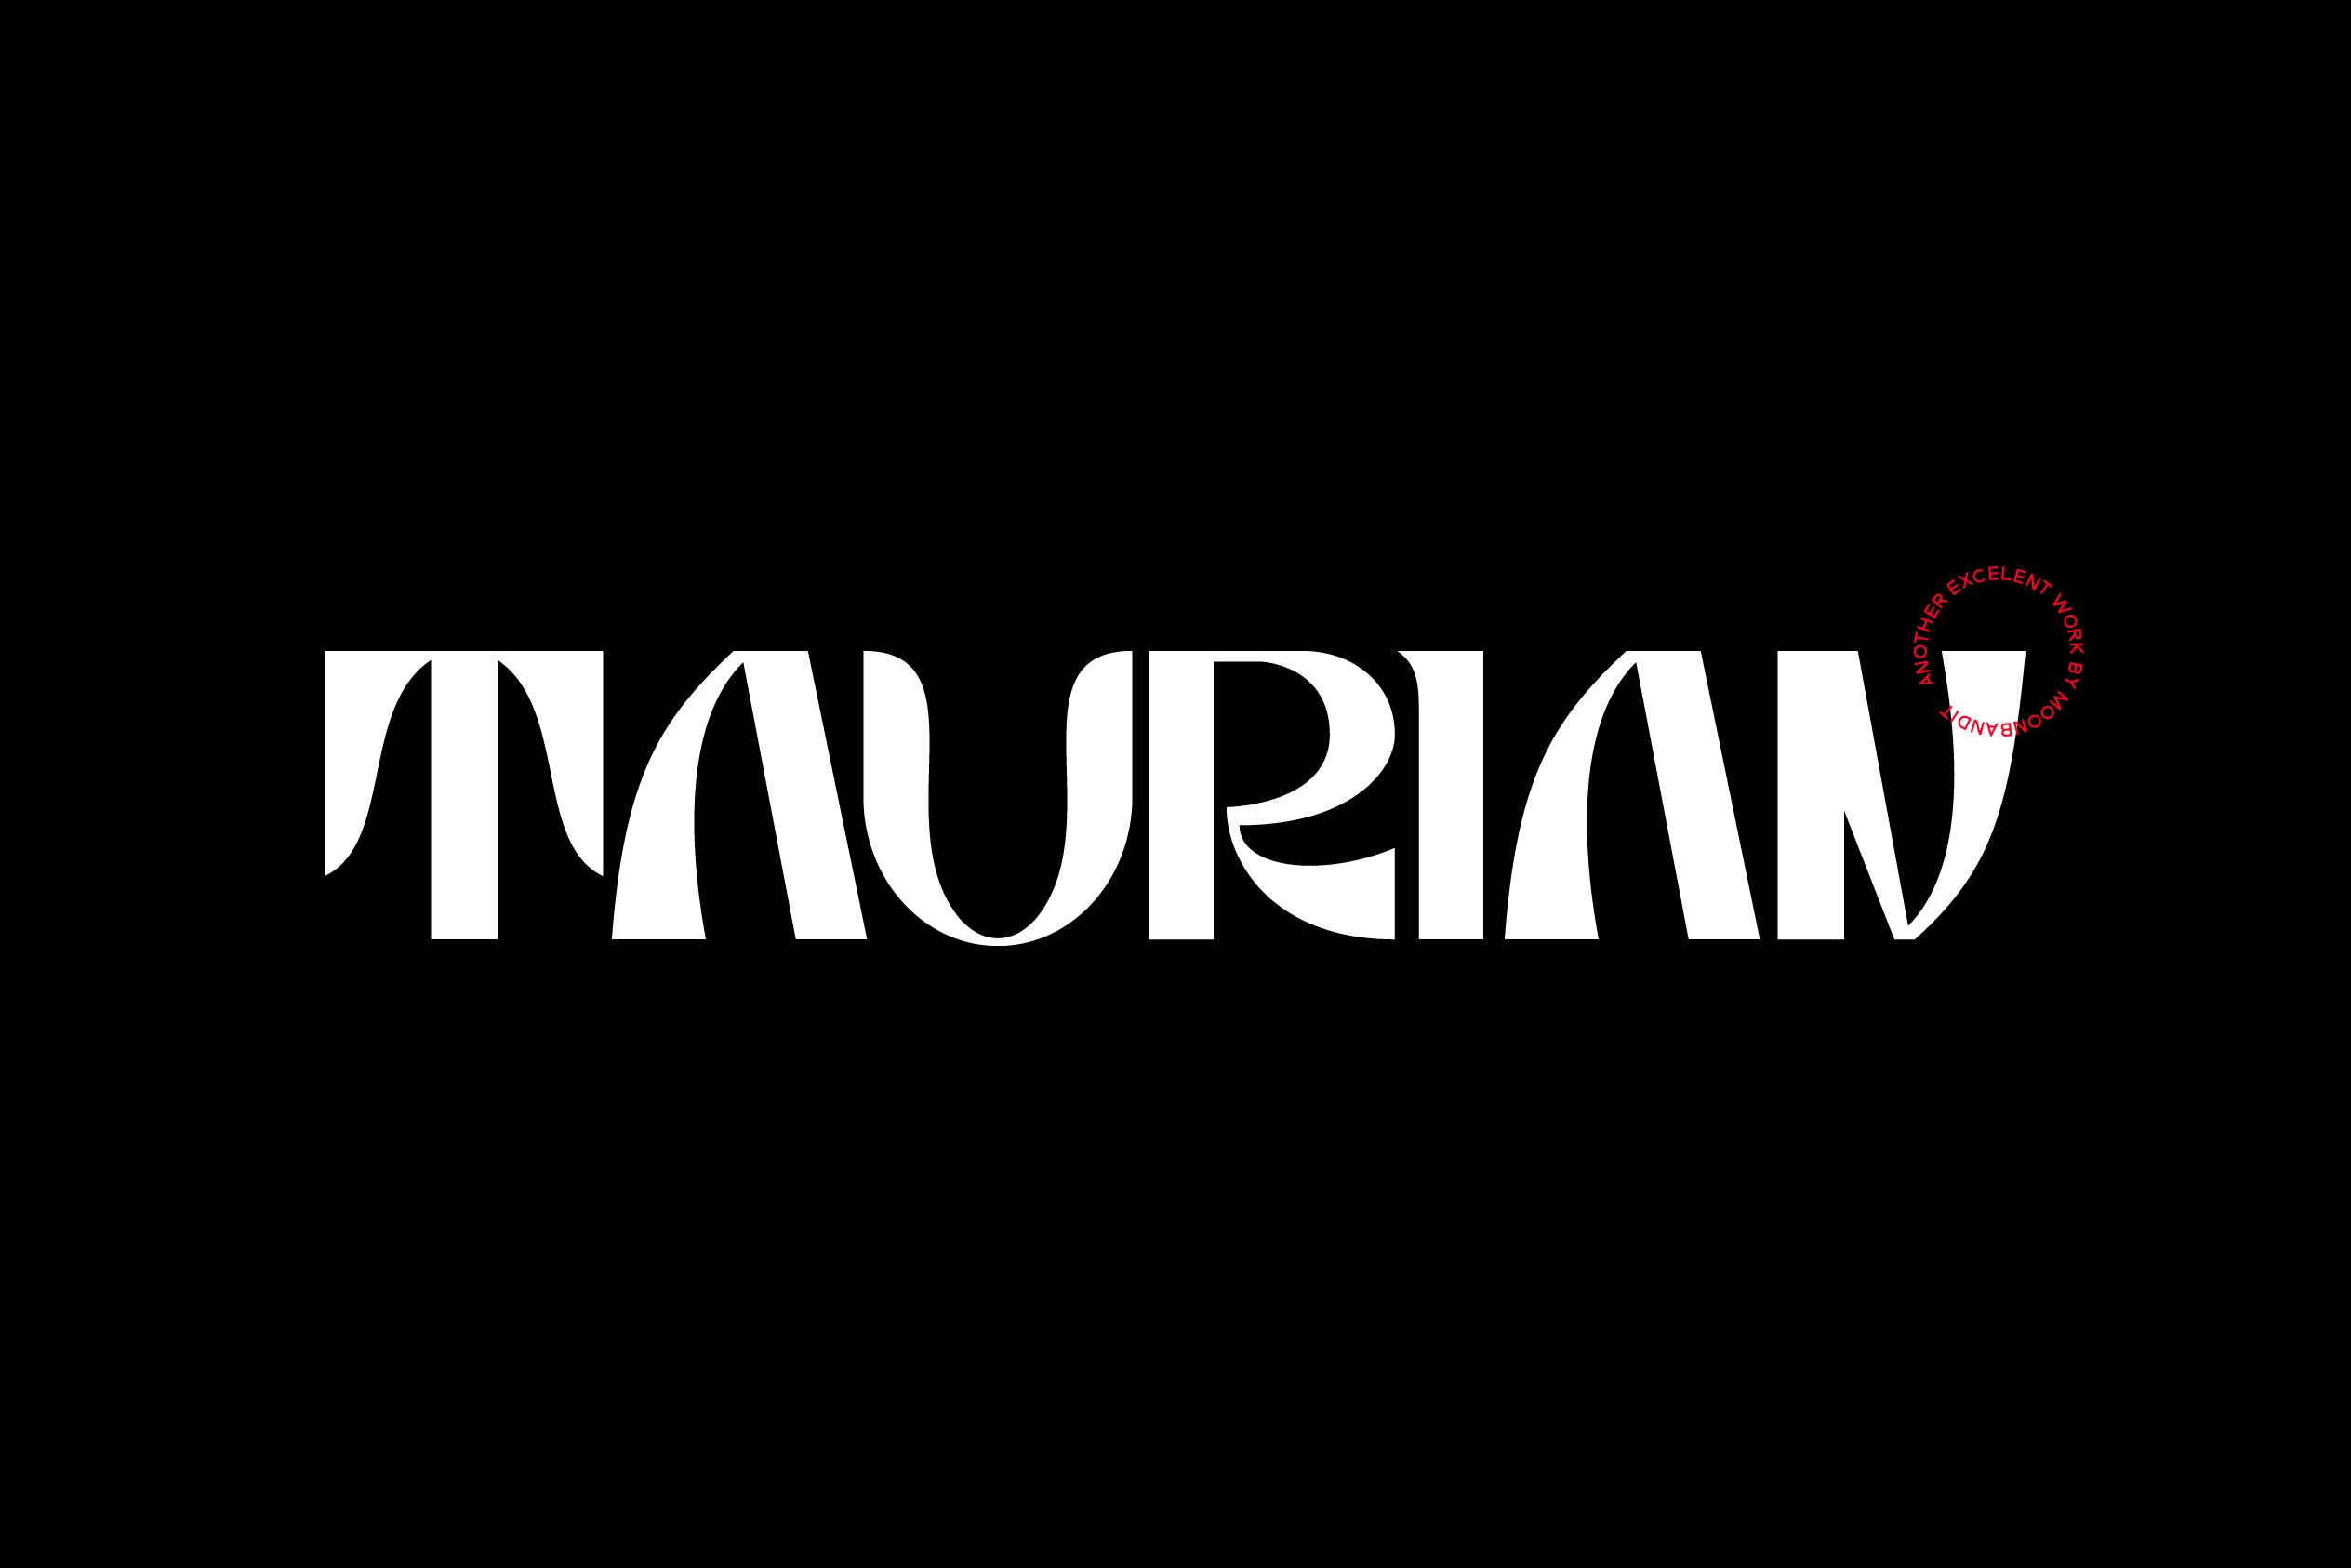 Taurian, bold & elegant display font cover image.